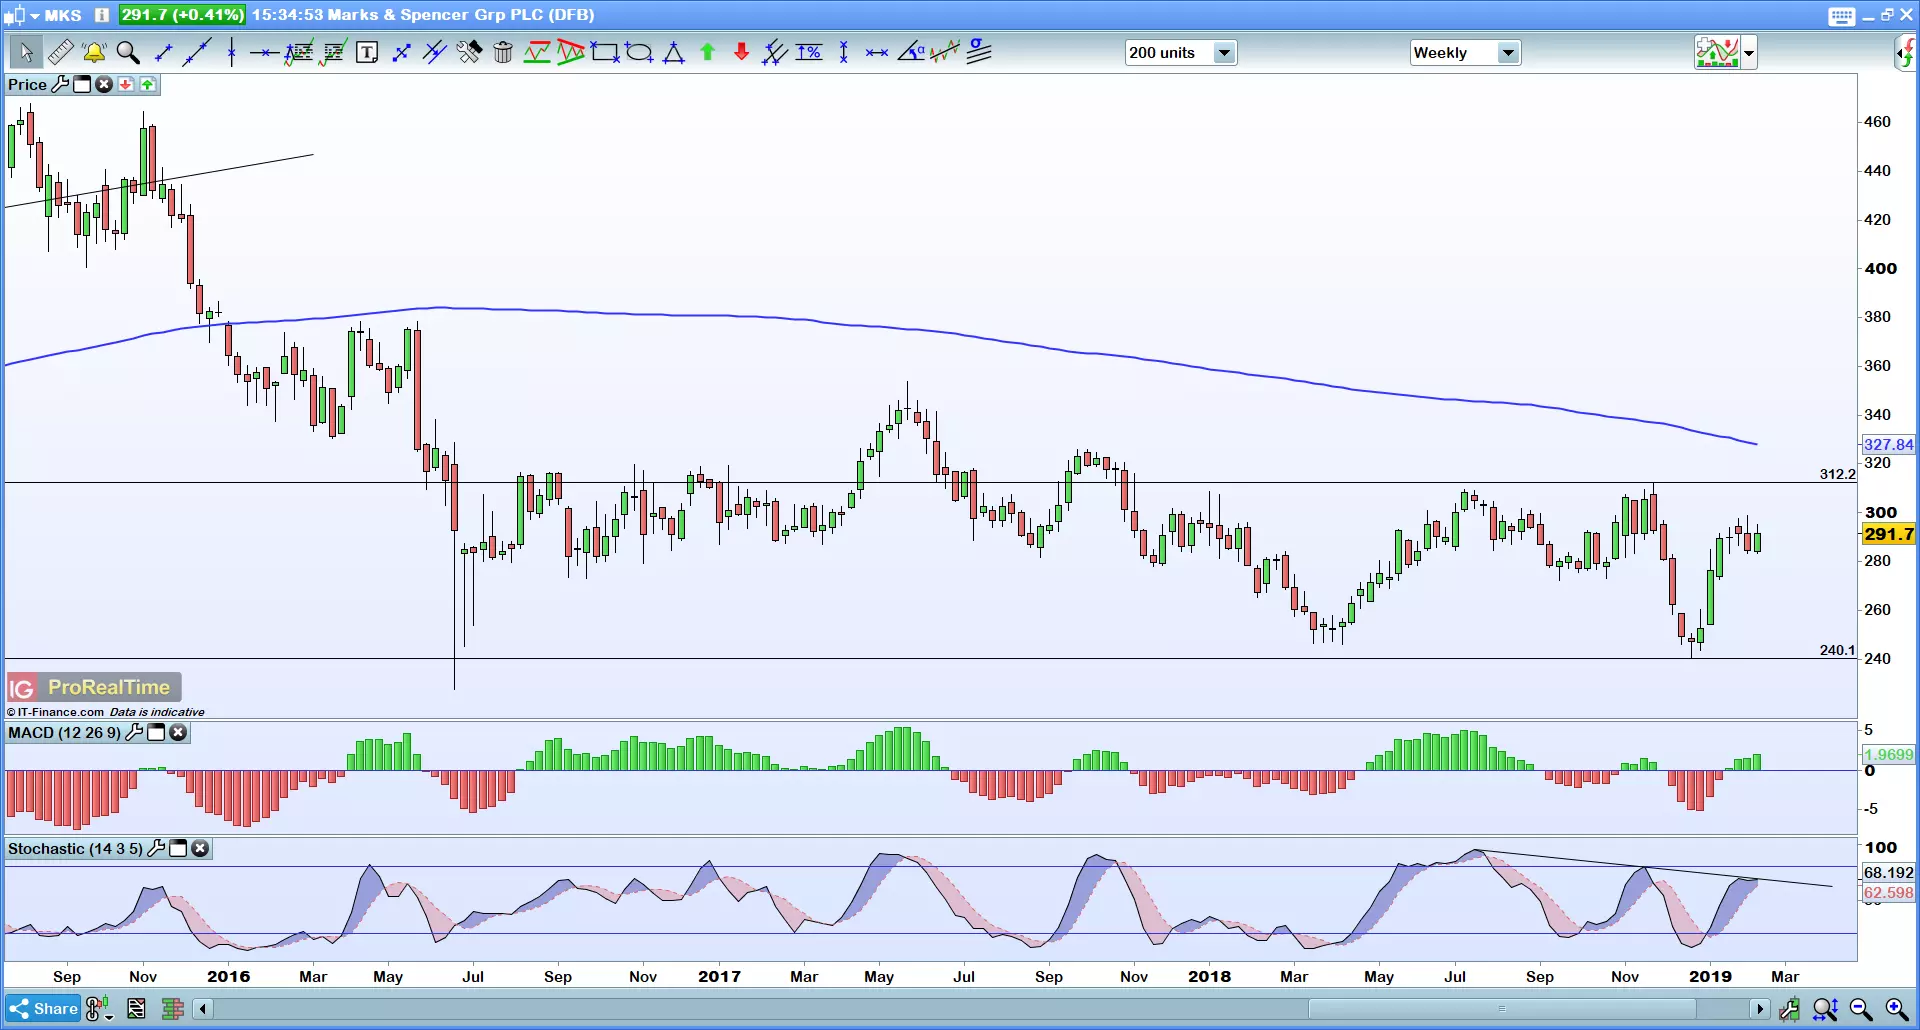 M&S weekly chart